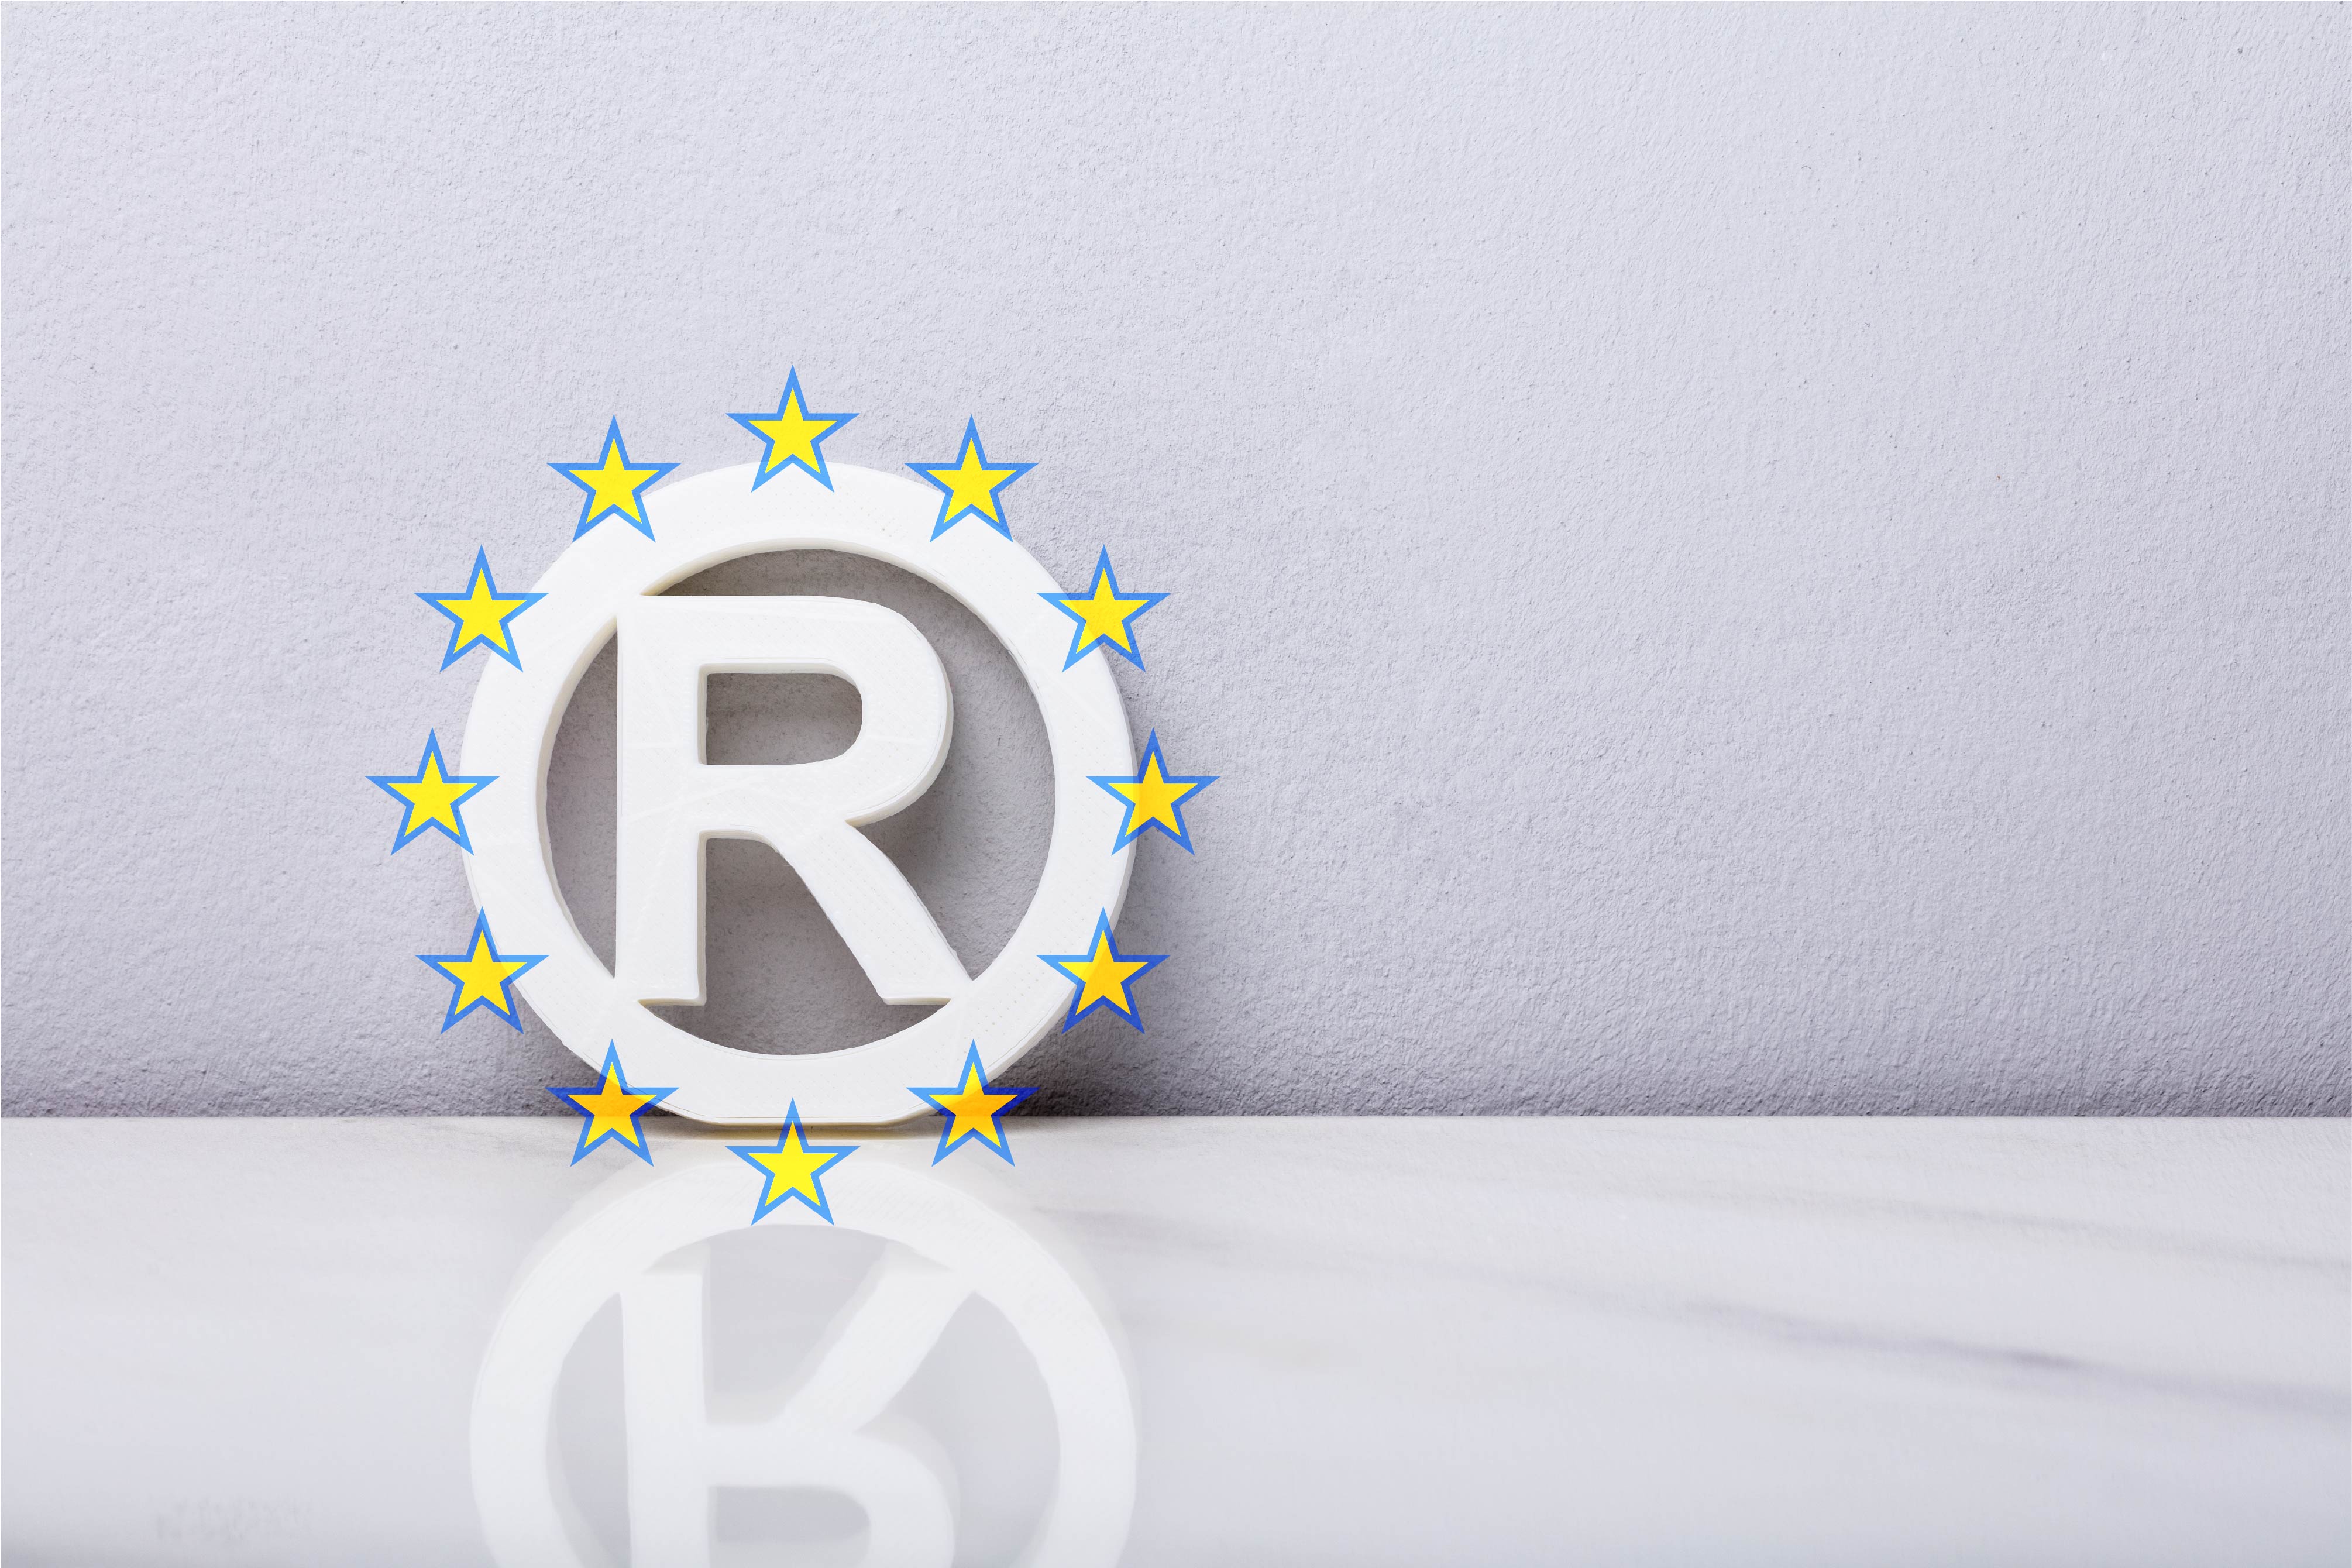 European Union (EU) trademark: should I go for it or choose to file separate national applications?